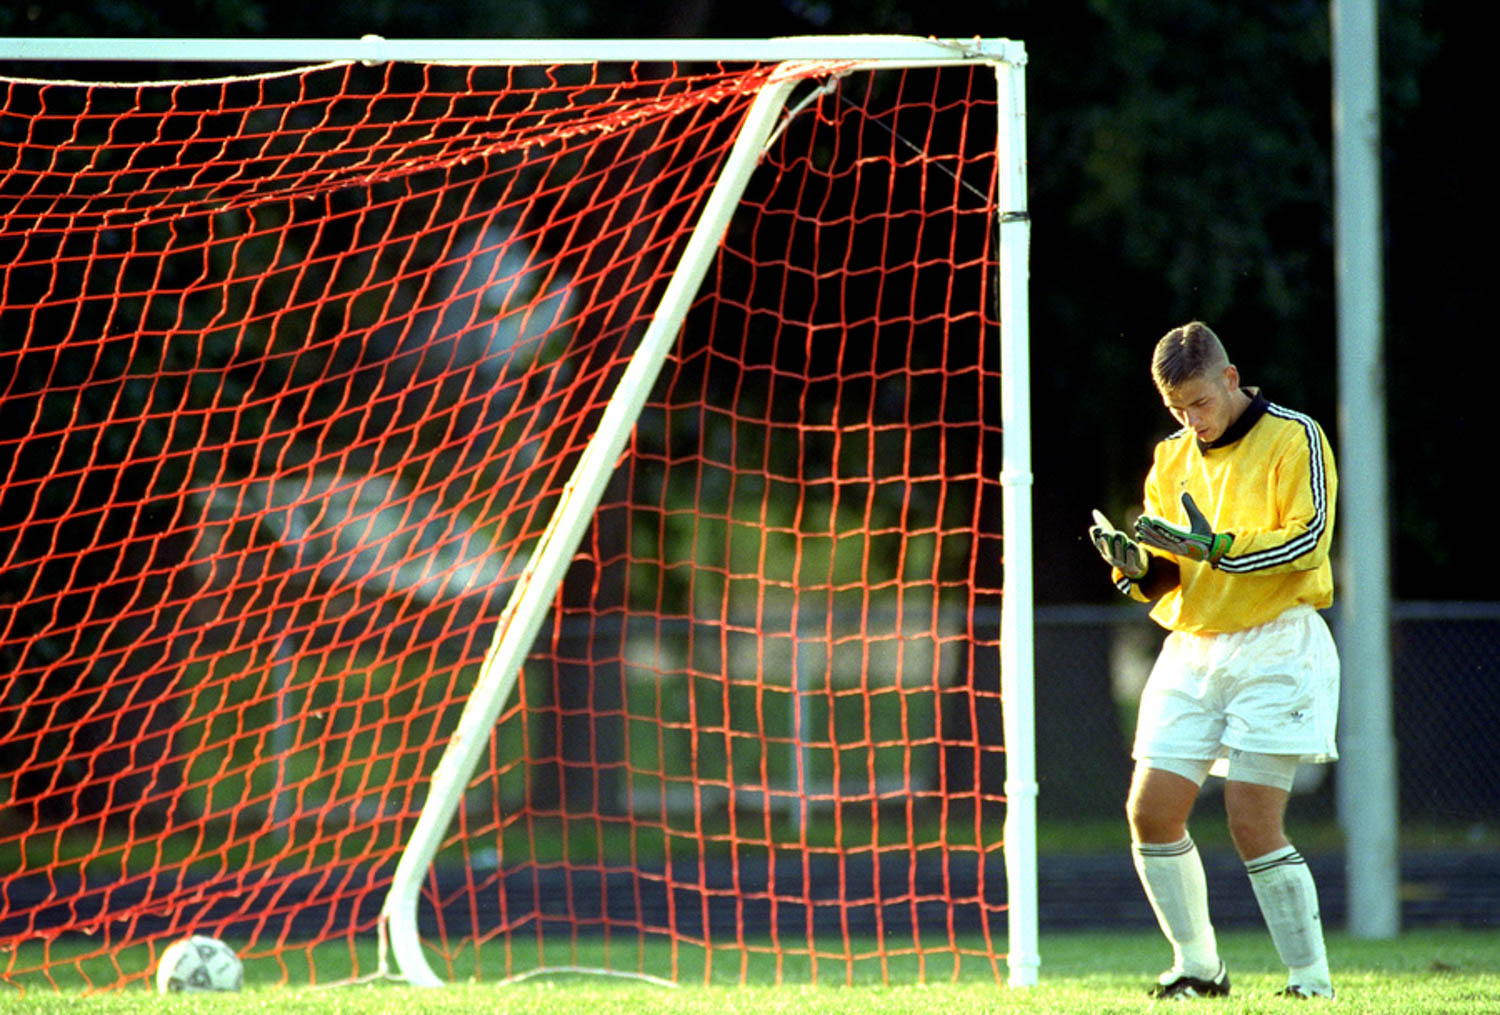 Moline High School soccer goalie Dan Schmidt stares at his hands in disbelief after allowing the eventual game winning goal to arch rival Rock Island. Moline previously had never lost to Rock Island in the history of the two programs. (Todd Mizener - Dispatch/Argus)